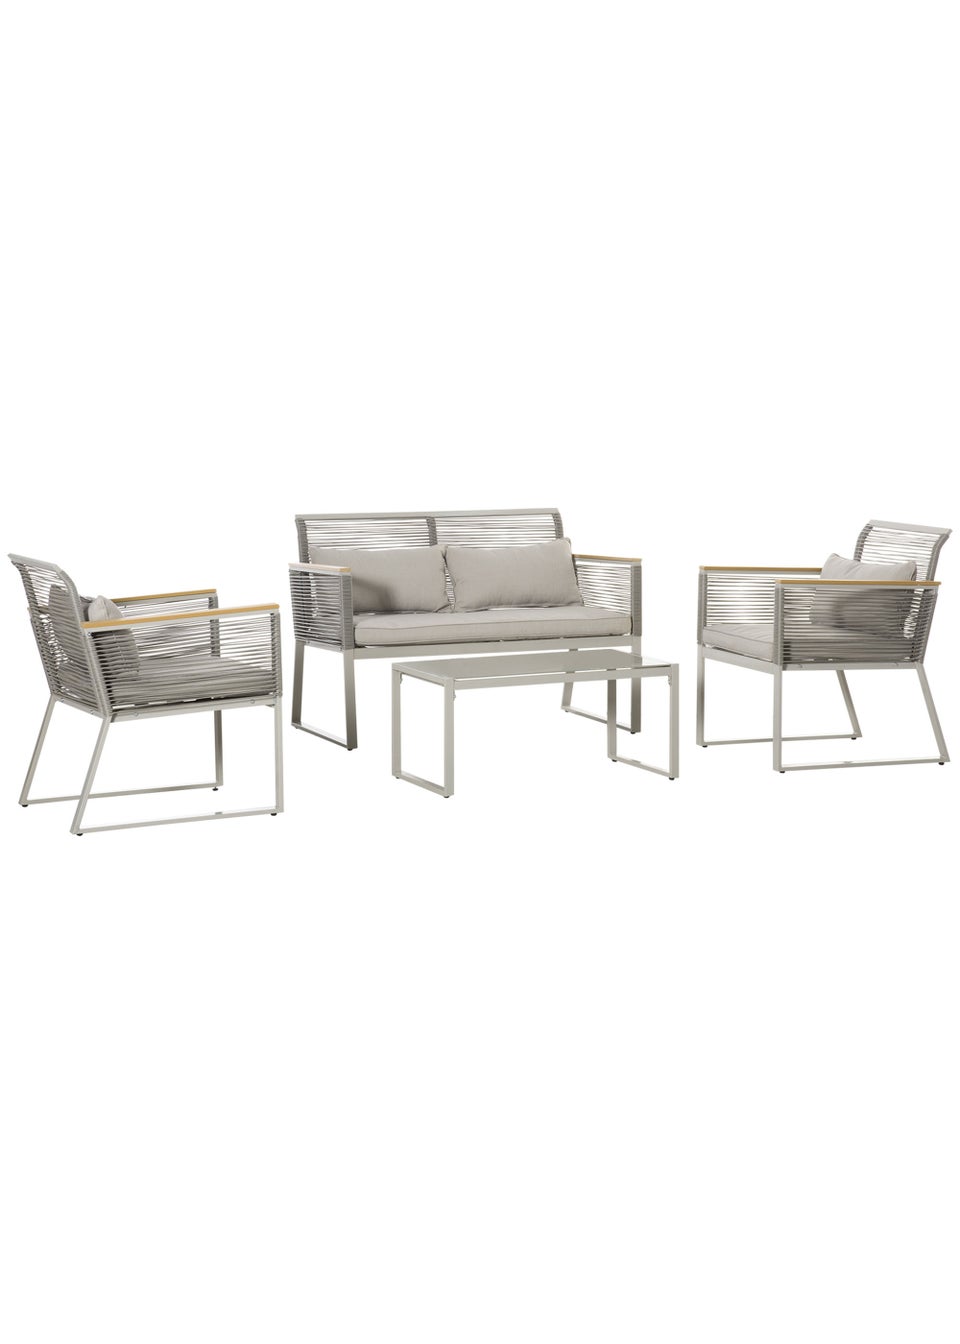 Outsunny 4 Piece Rope Rattan Effect Outdoor Furniture Set